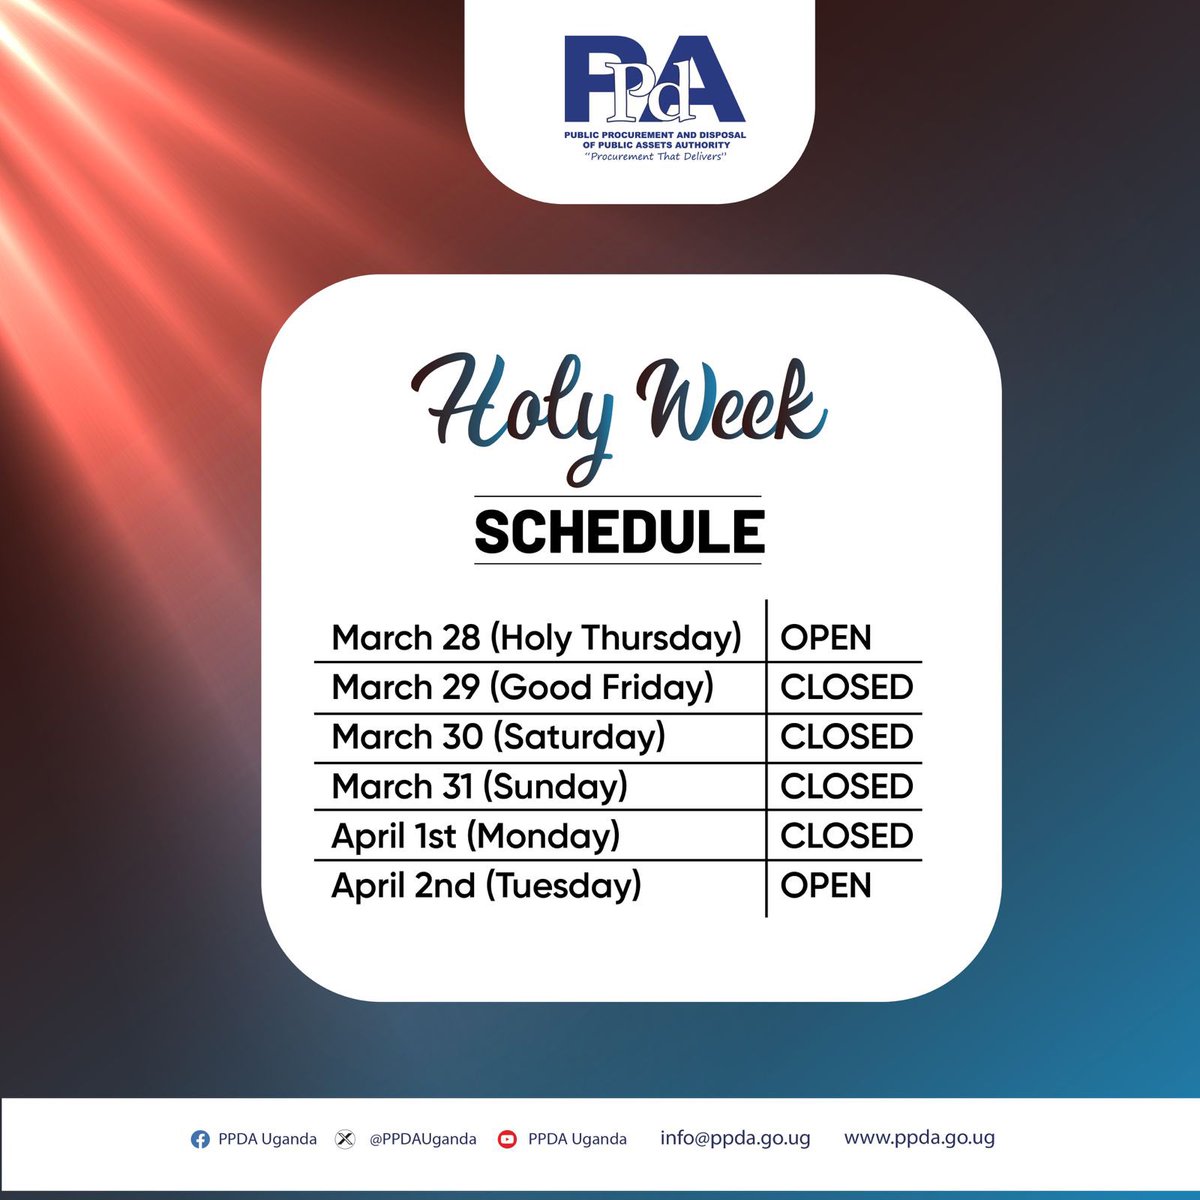 Esteemed stakeholders. 📌Please take note of the PPDA(Uganda)’s schedule during this Holy Week. Thank you 🙏